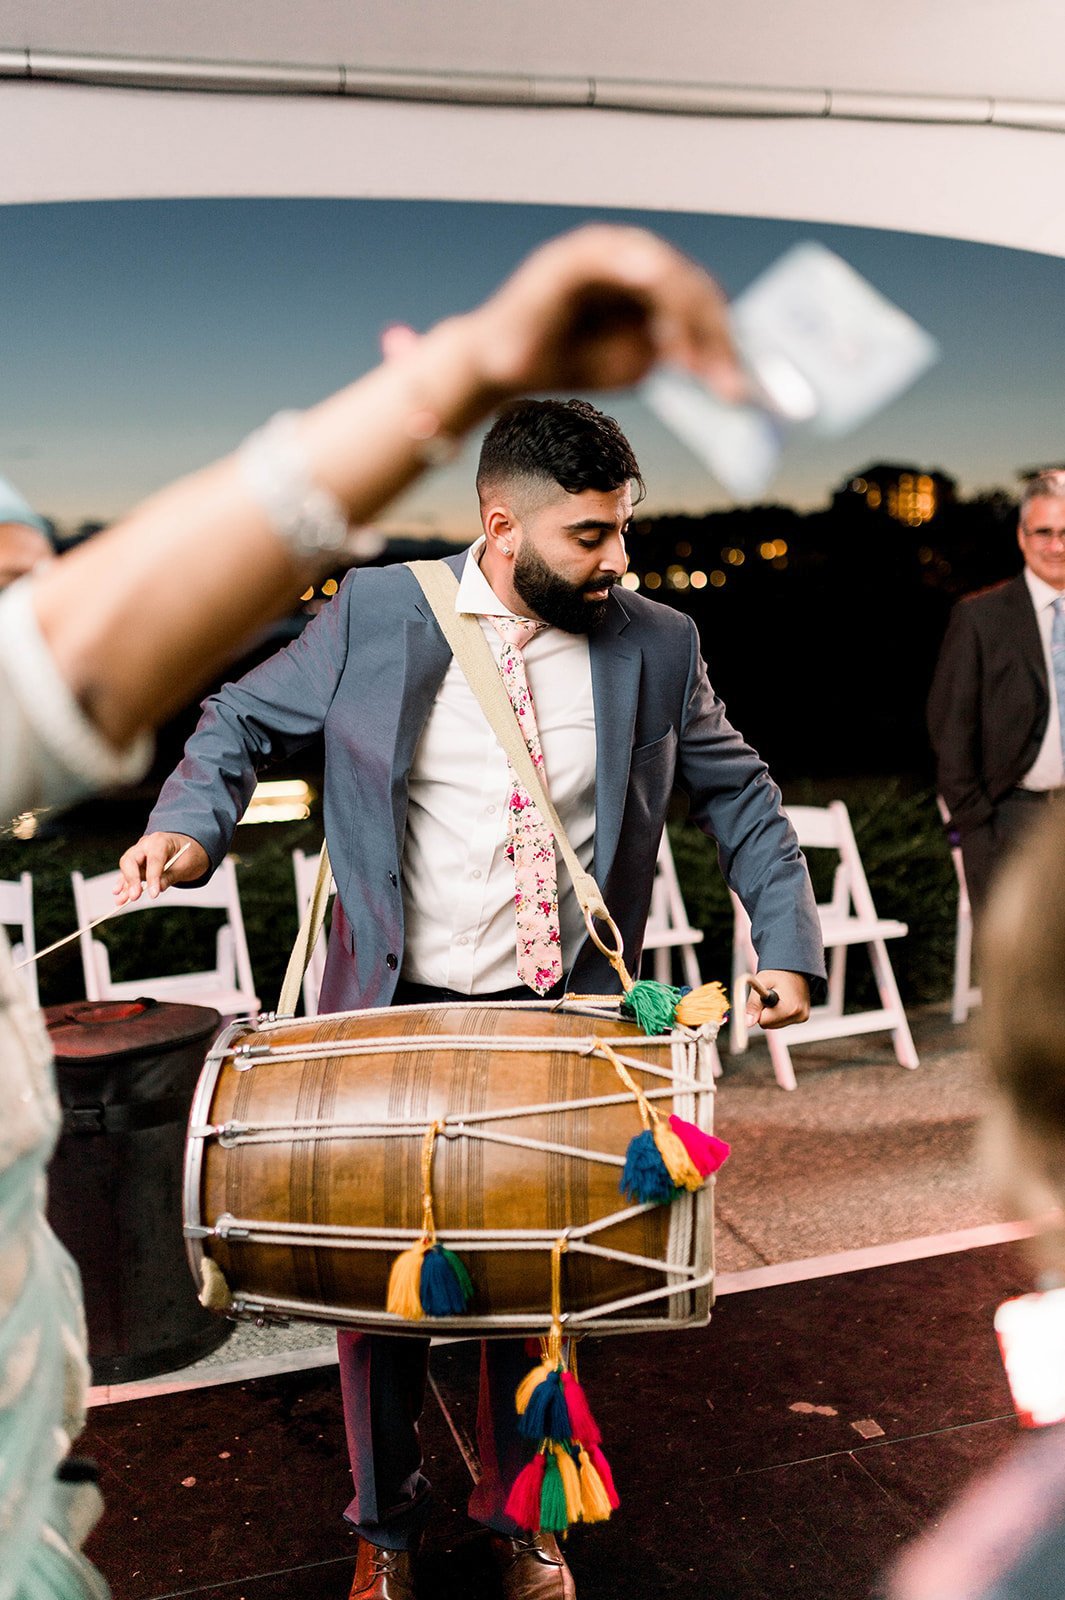 A dol player drums on the dancefloor in Victoria BC